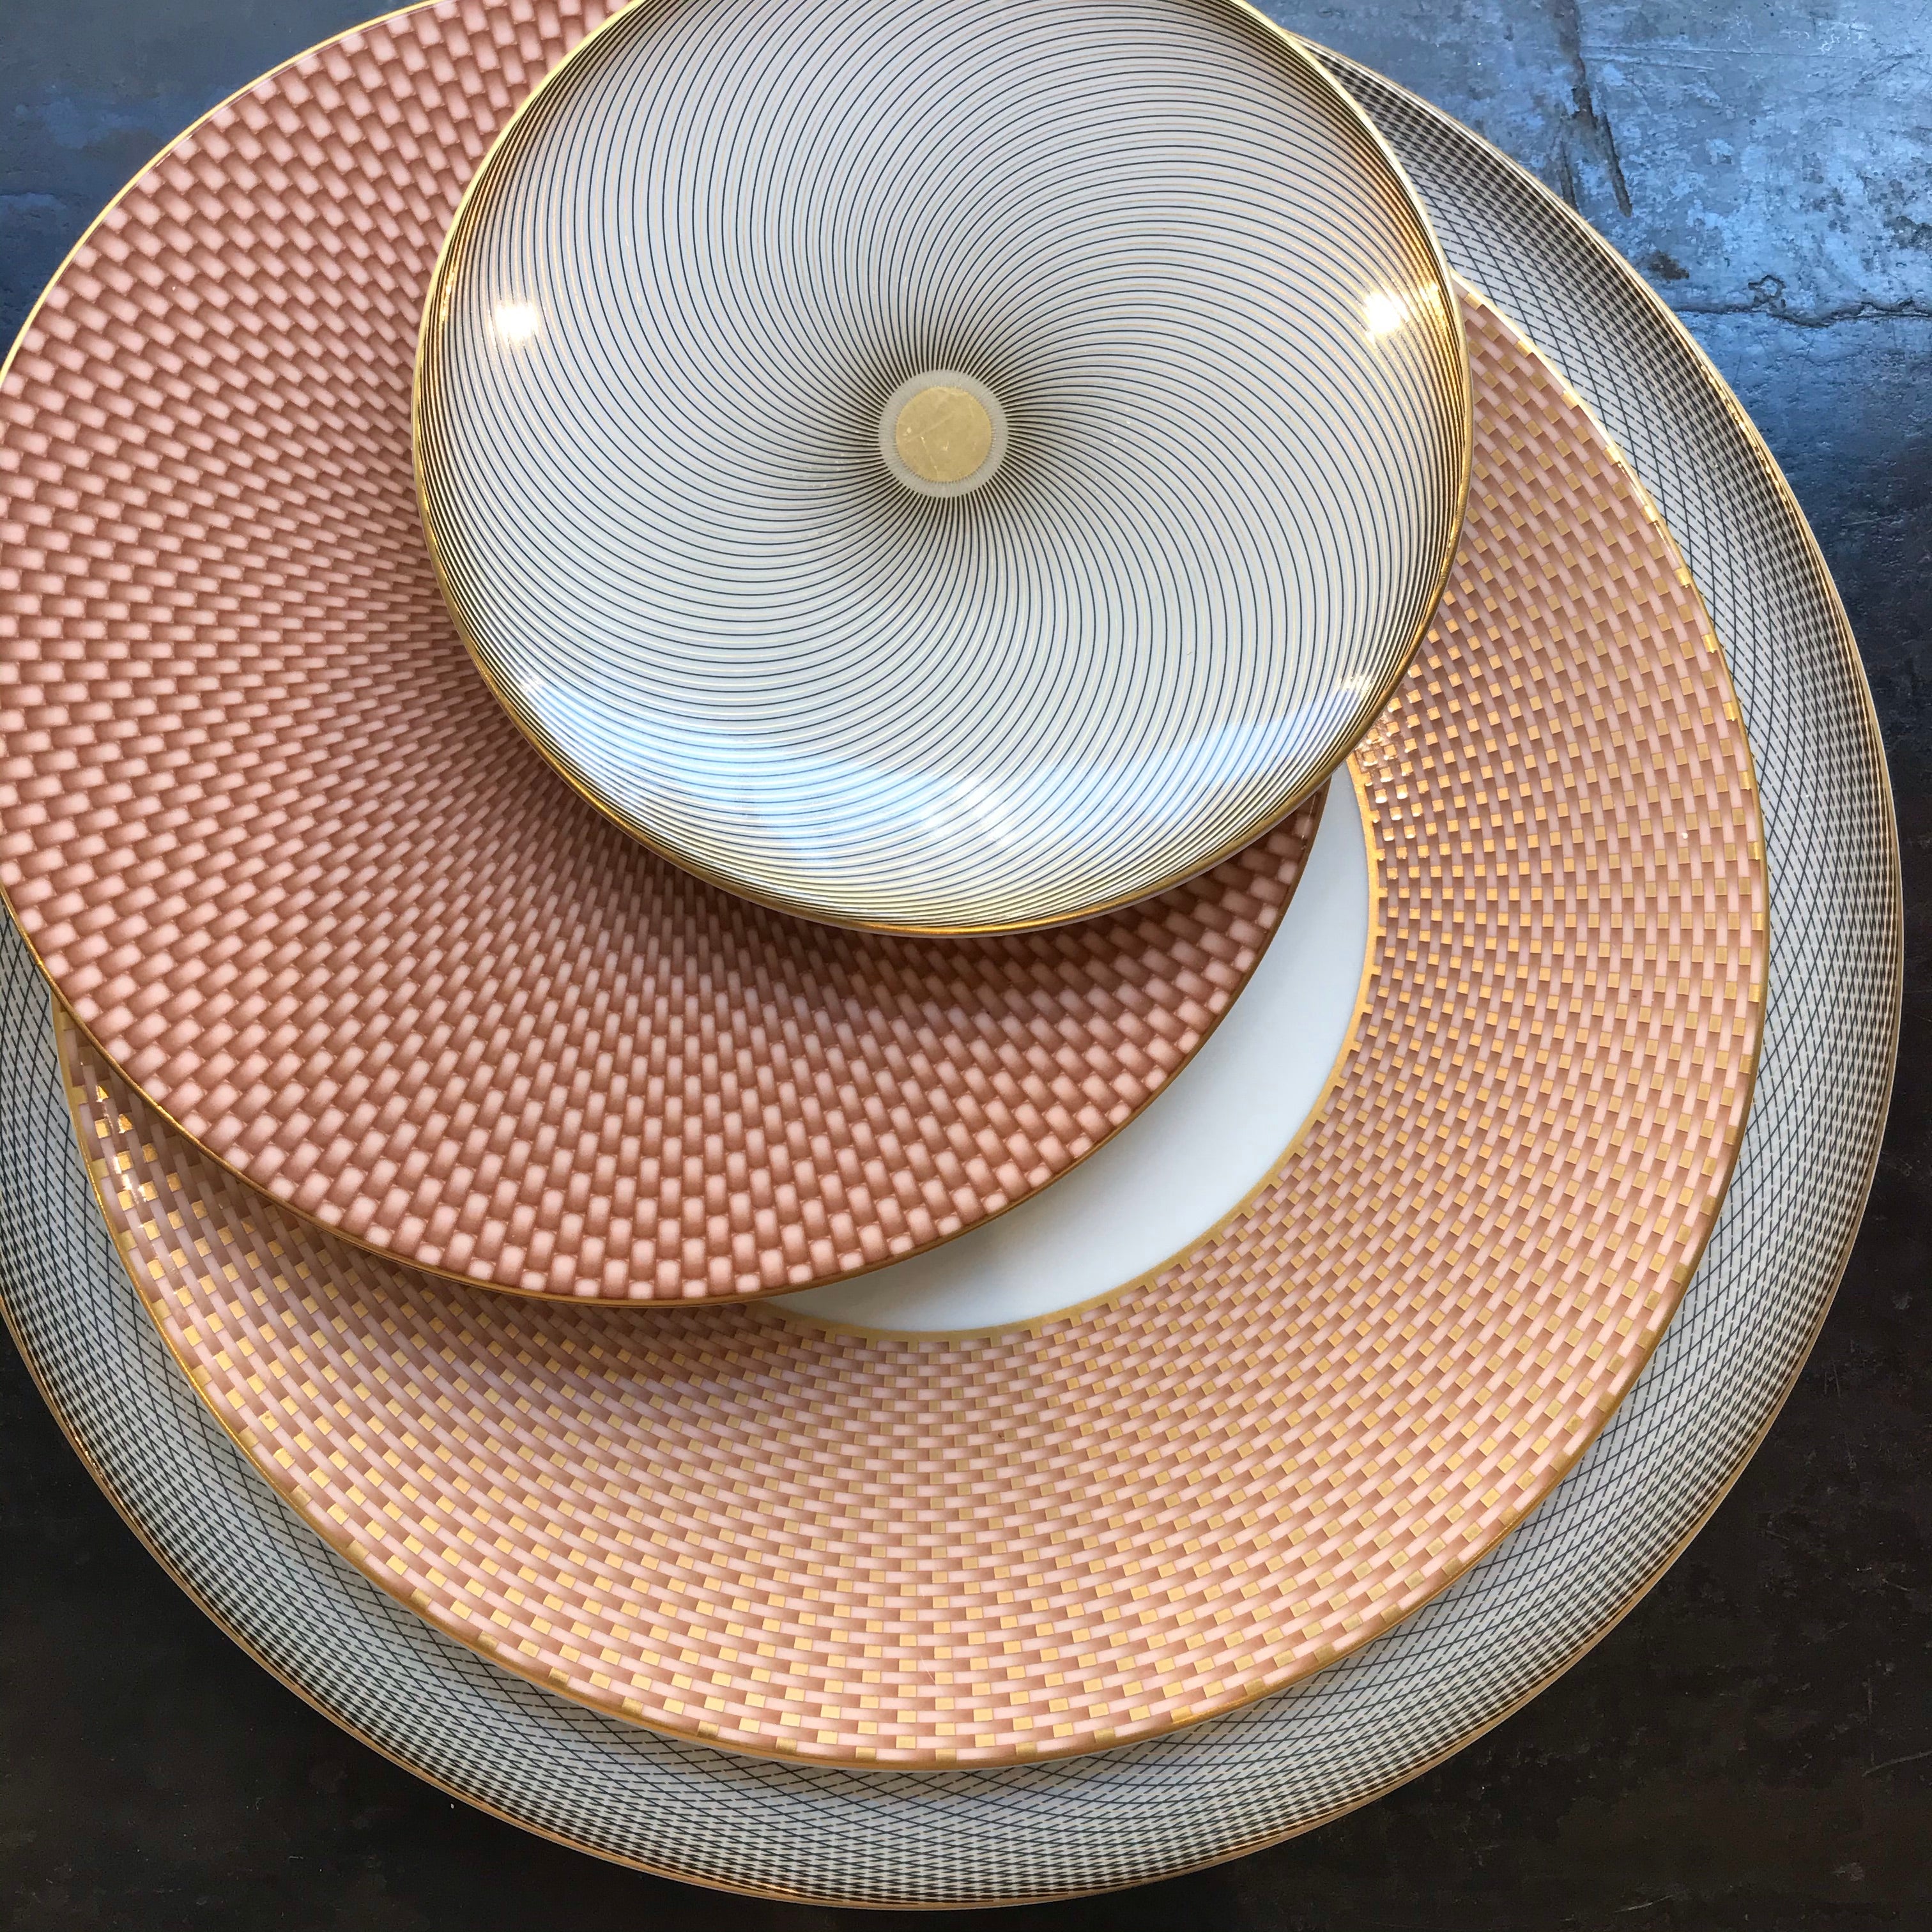 bread plate Tresor Beigge porcelain Raynaud Limoges Luxe